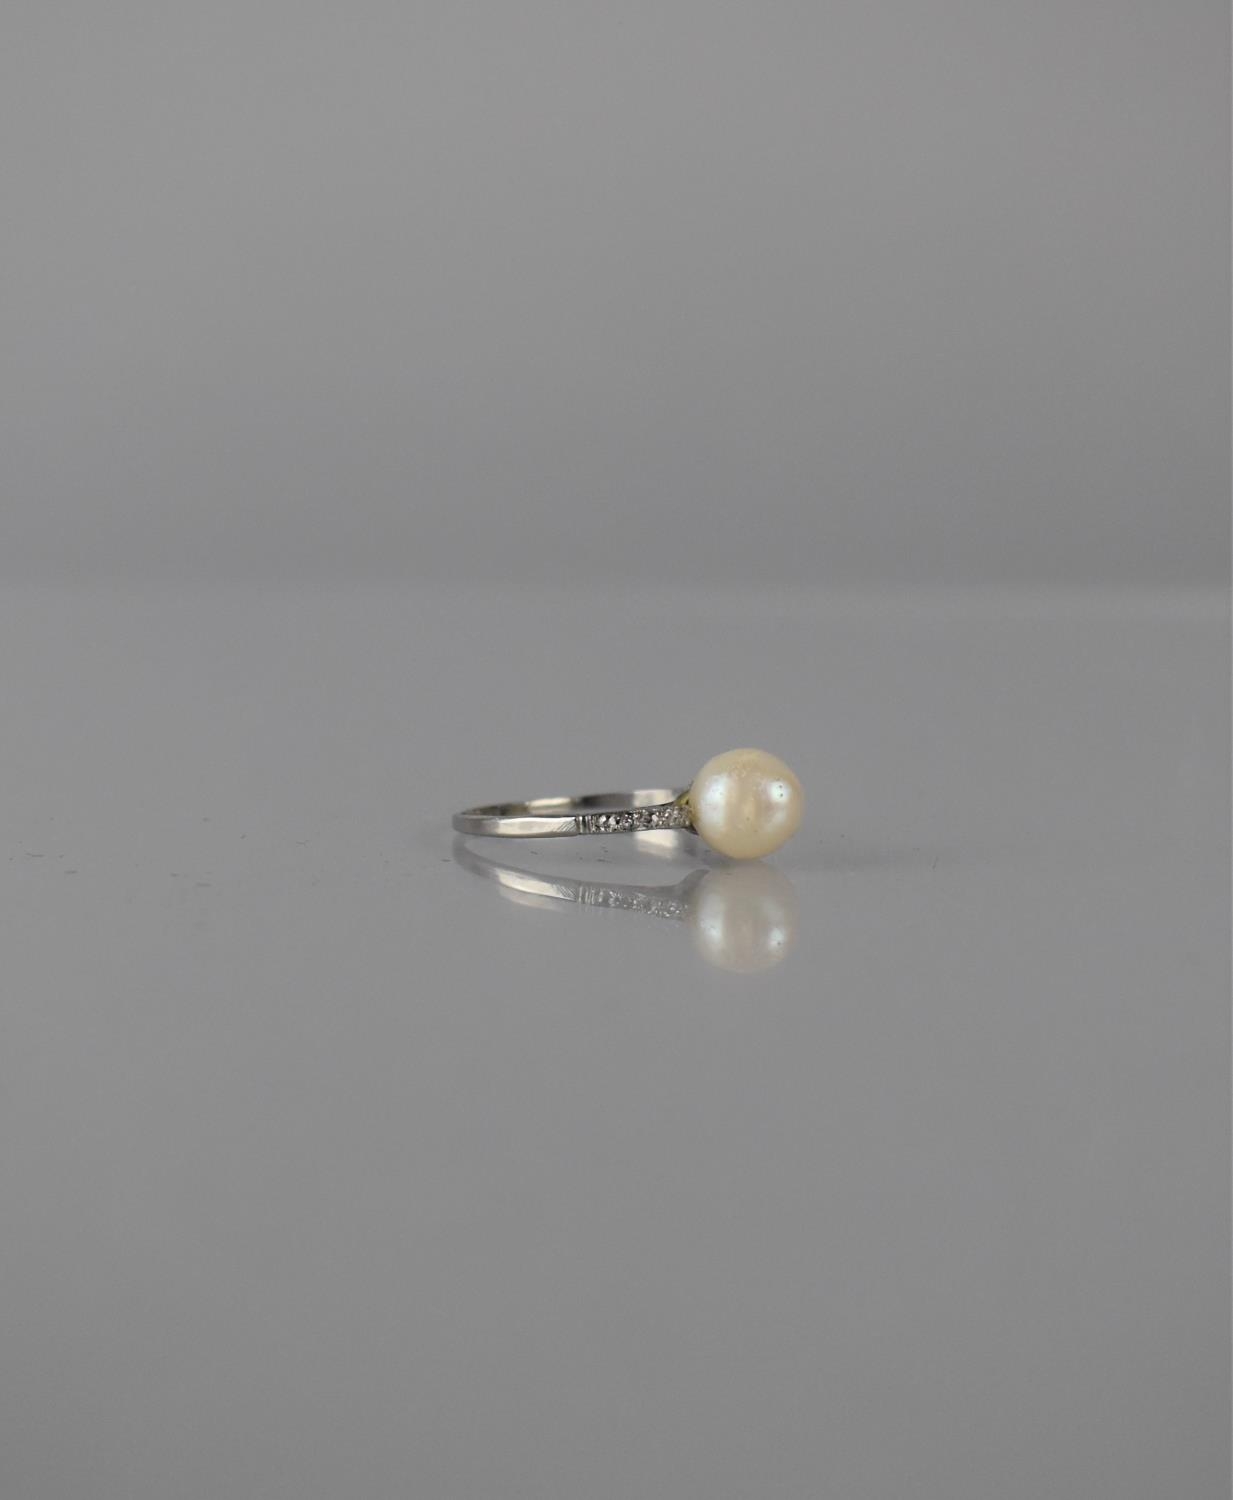 An Art Deco Pearl and Diamond Dress Ring, Central Ivory Pearl Measuring 8mm Diameter and 8mm Tall